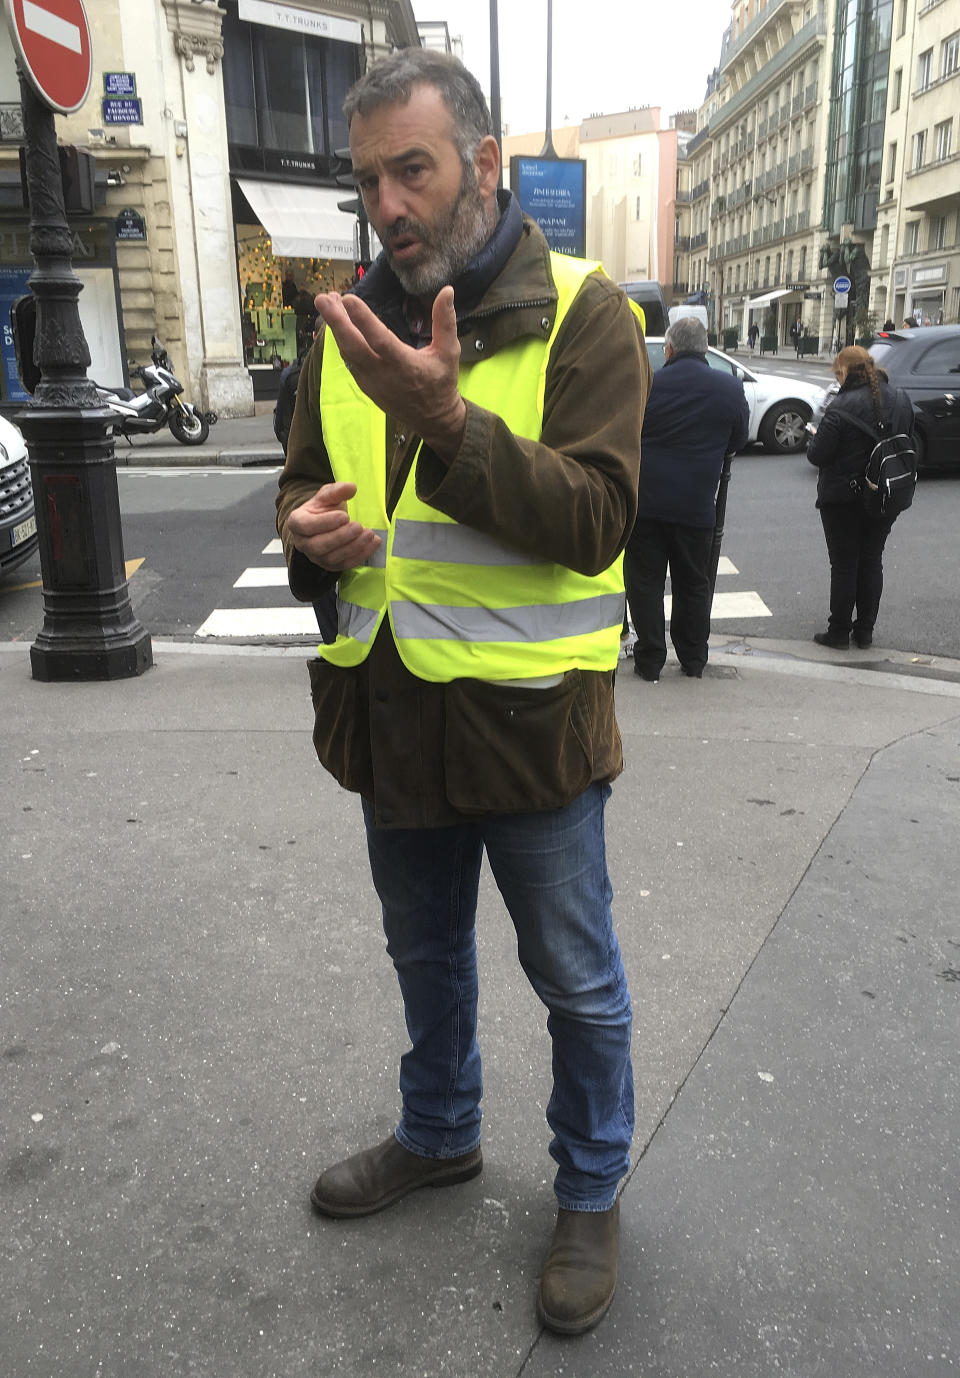 Christophe Chalencon, one of the figures at the forefront of France's protest movement, talks with The Associated Press, Wednesday, Dec. 5, 2018 in Paris. says that he fears more deaths if Saturday's demonstration goes ahead but that President Emmanuel Macron could bring calm if he speaks out. (AP Photo/Bertrand Combaldieu)